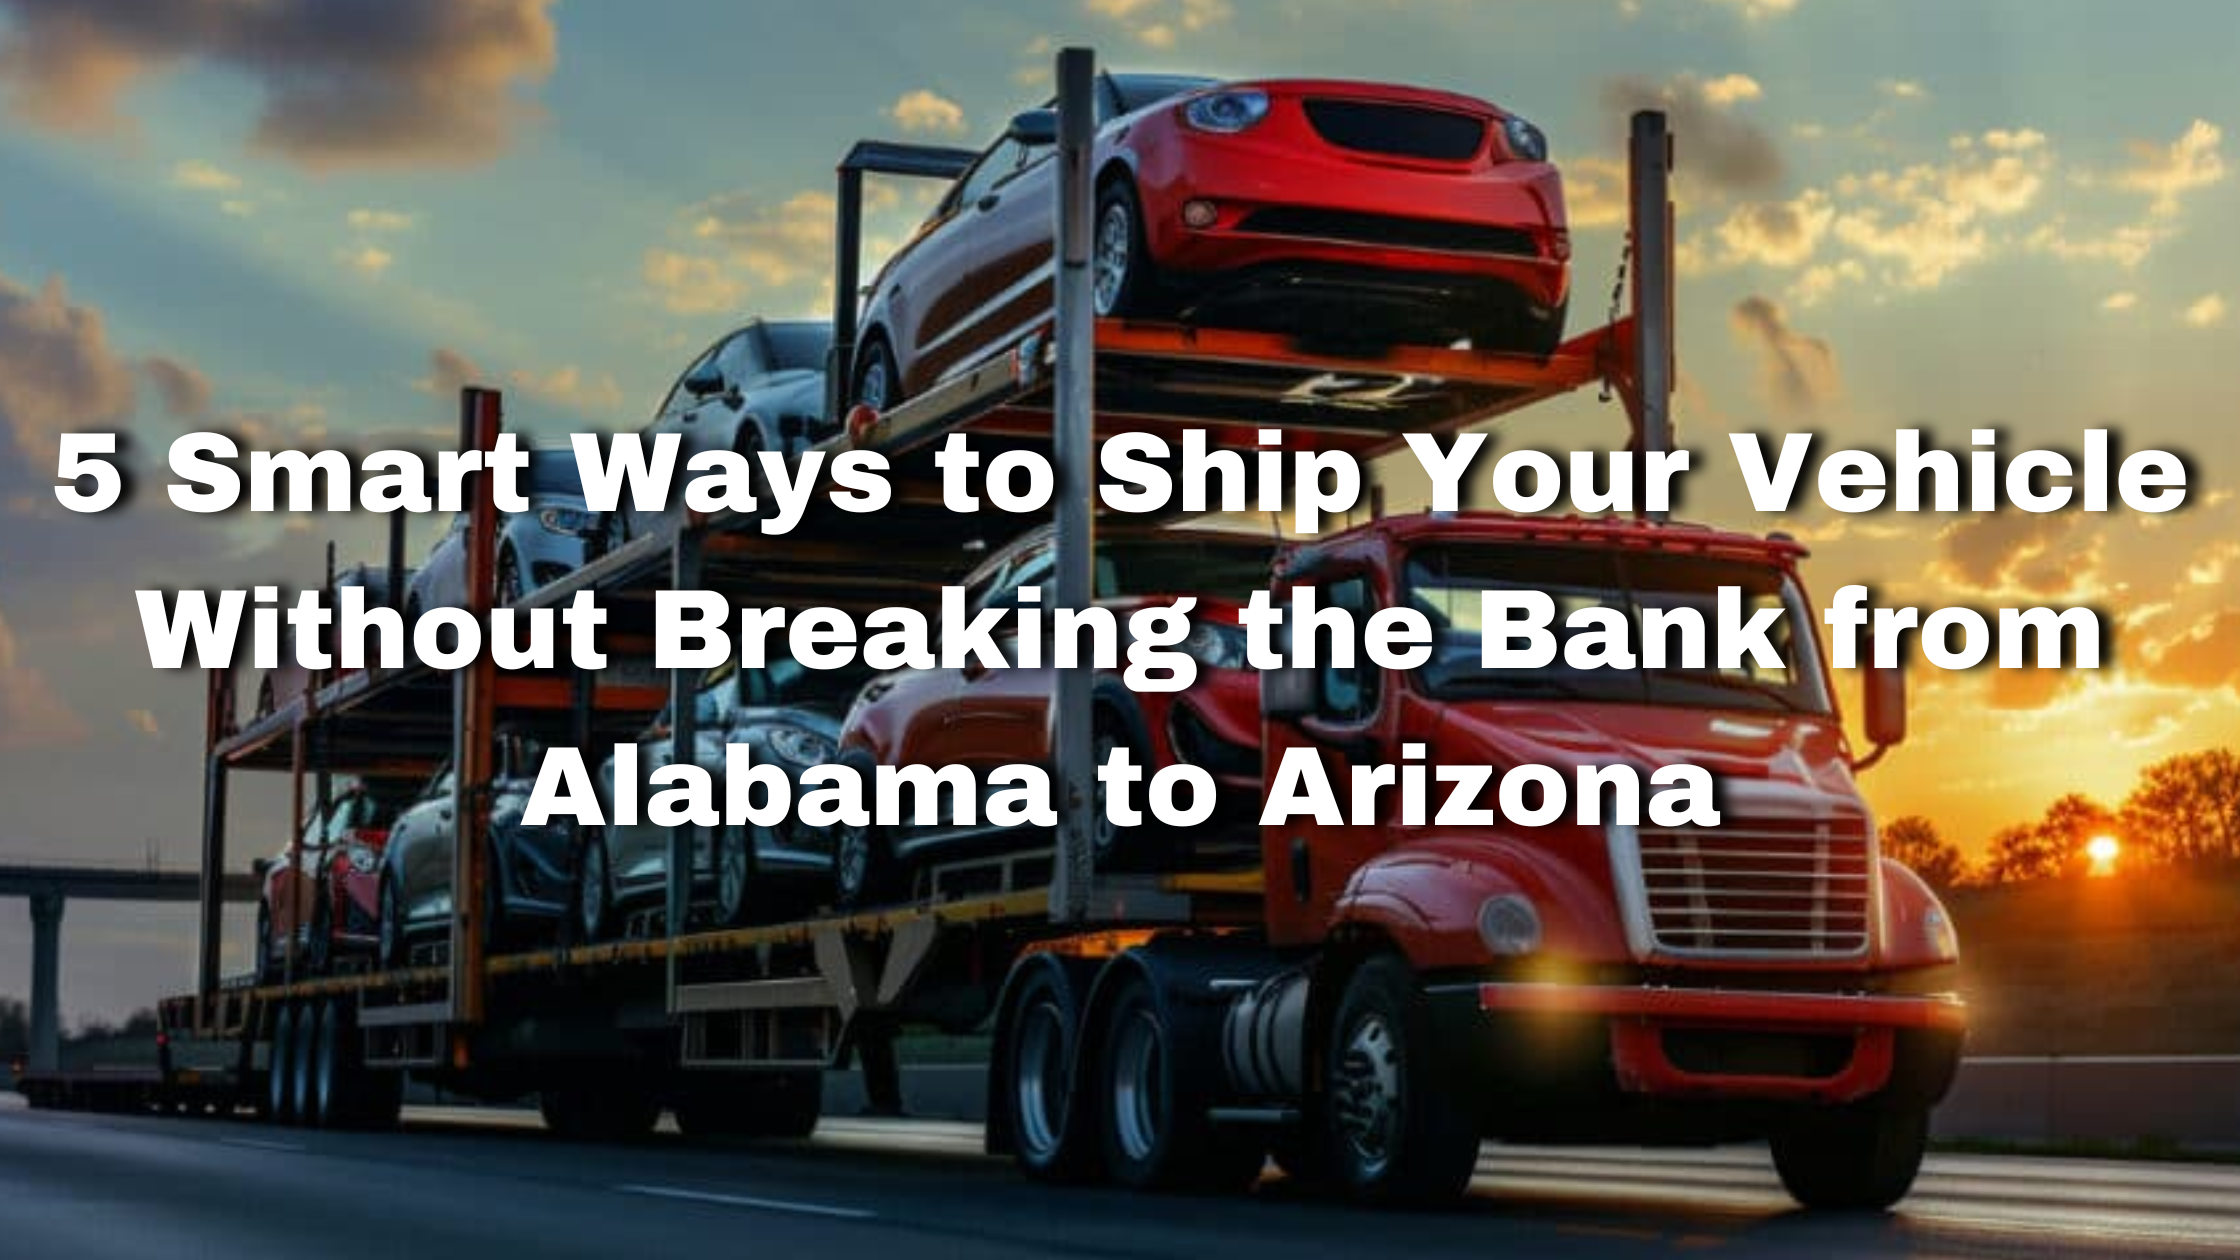 5 Clever Ways to Ship Your Vehicle Without Breaking the Bank from Alabama to Arizona